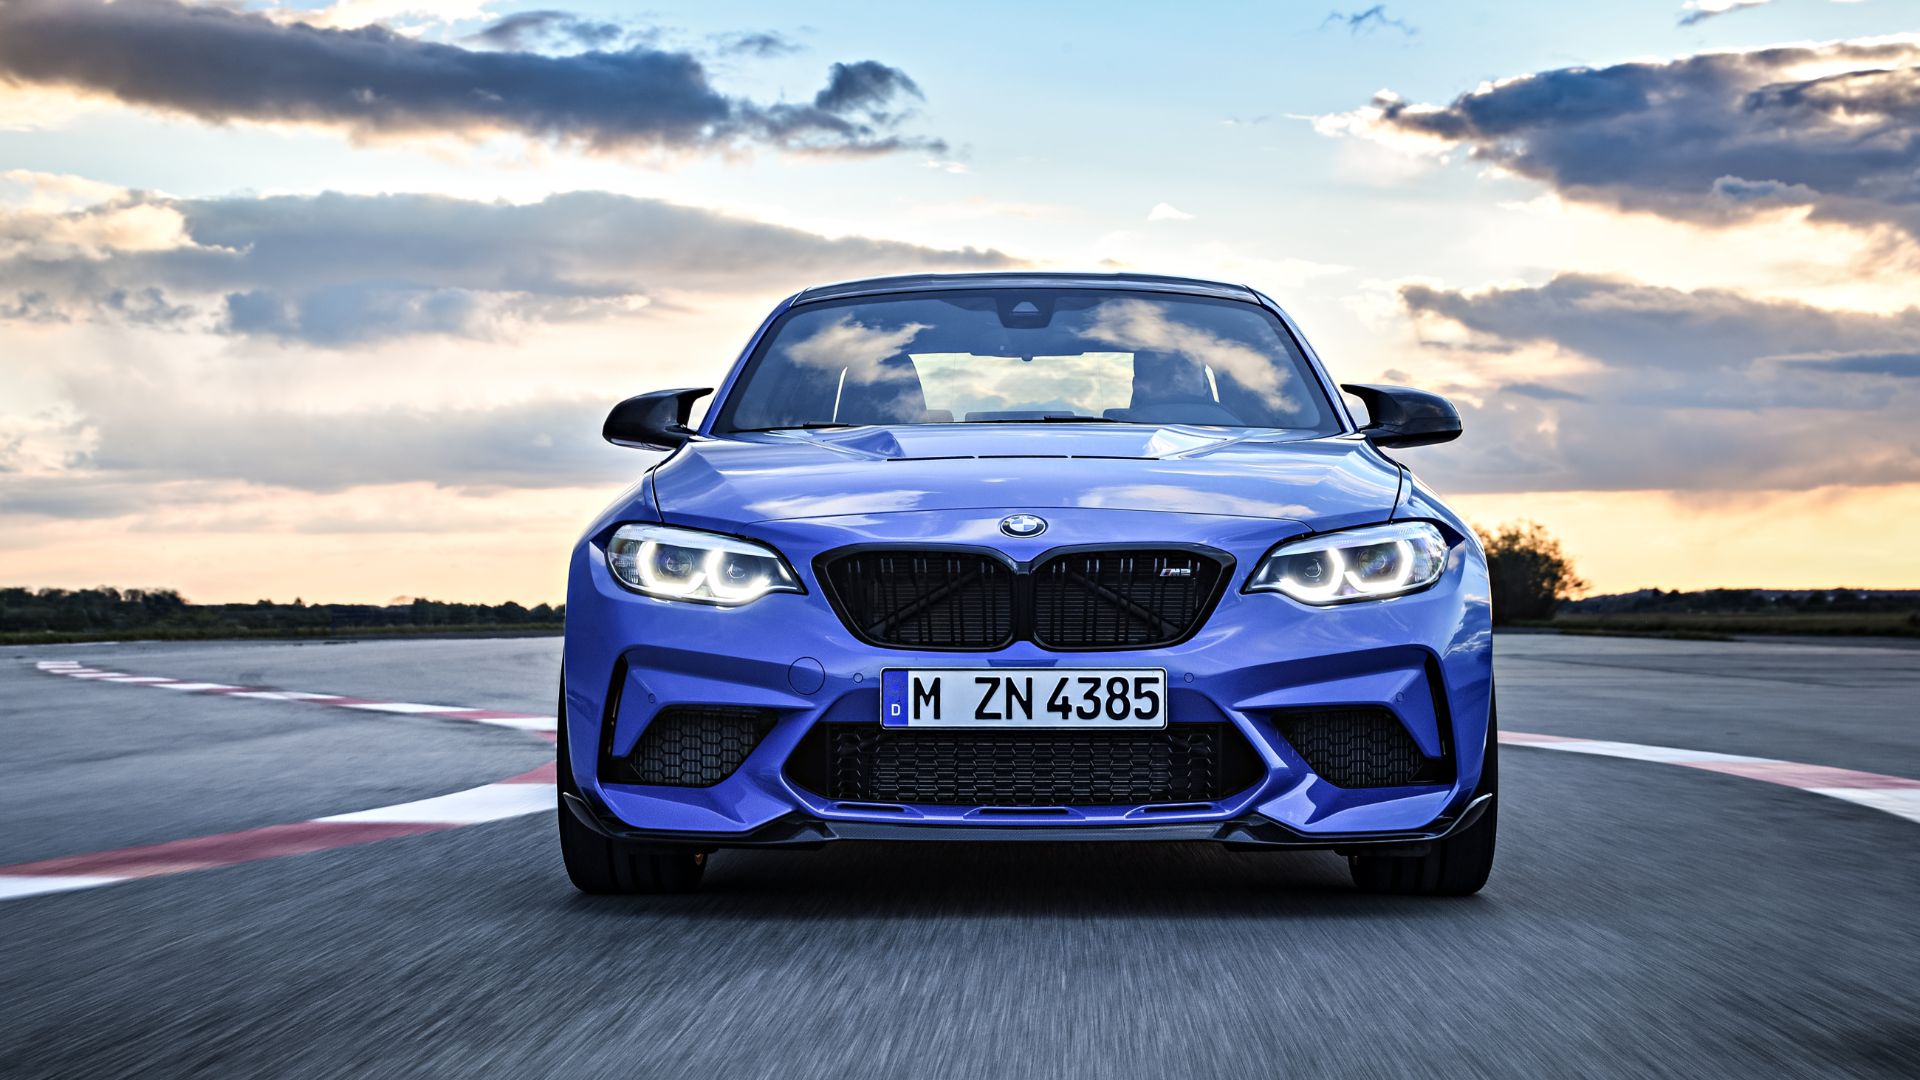 Our Best Look Yet At An Alpine White BMW M2